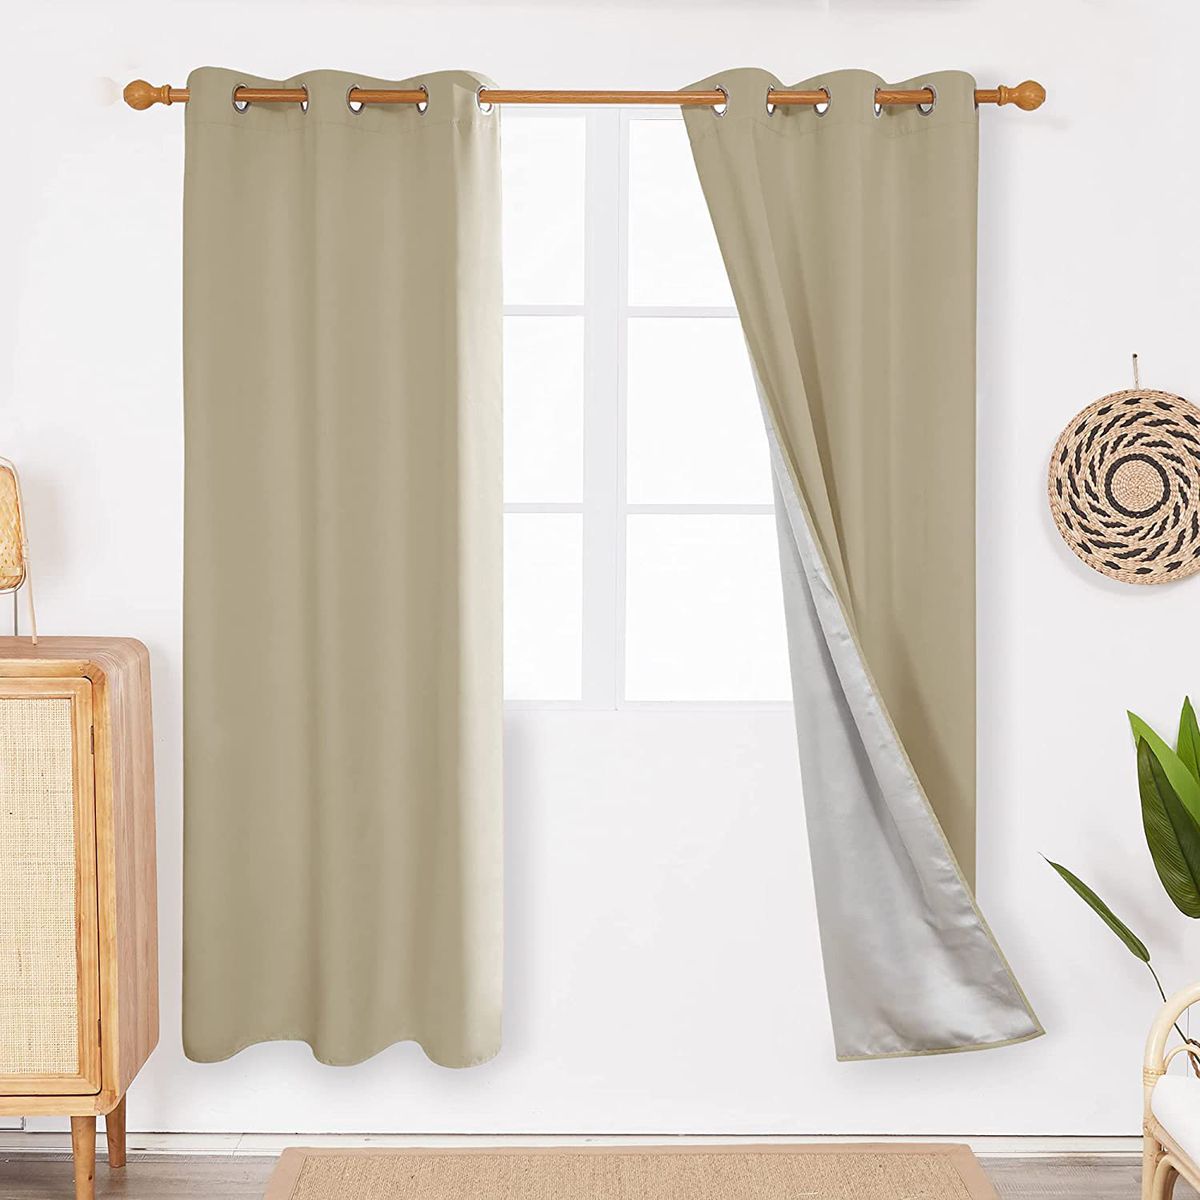 Heat Blocking Curtains for Small Windows